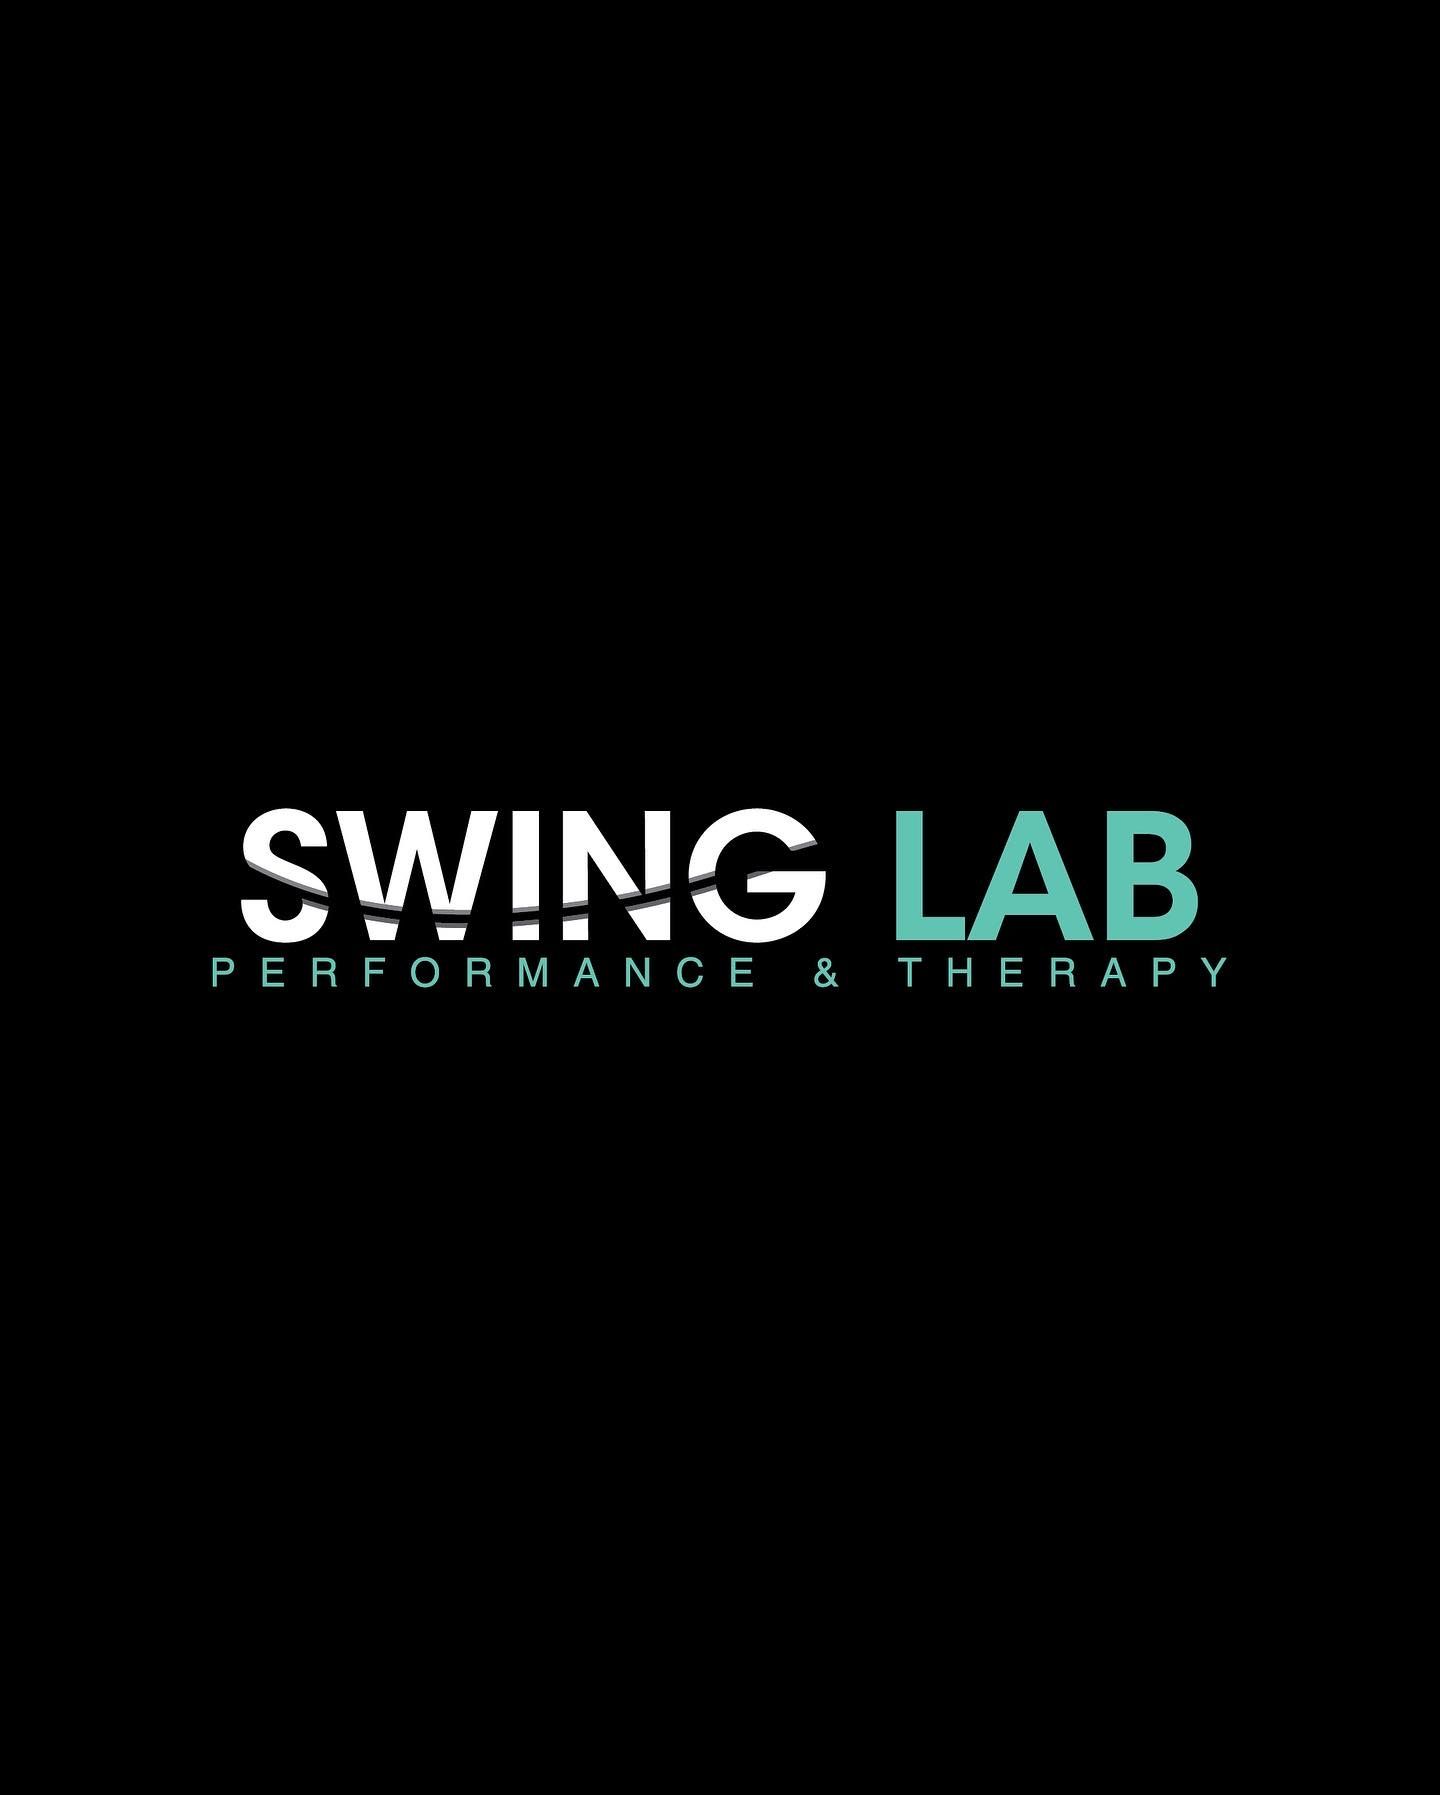 It's All About Your Body - Swing Lab Performance & Therapy